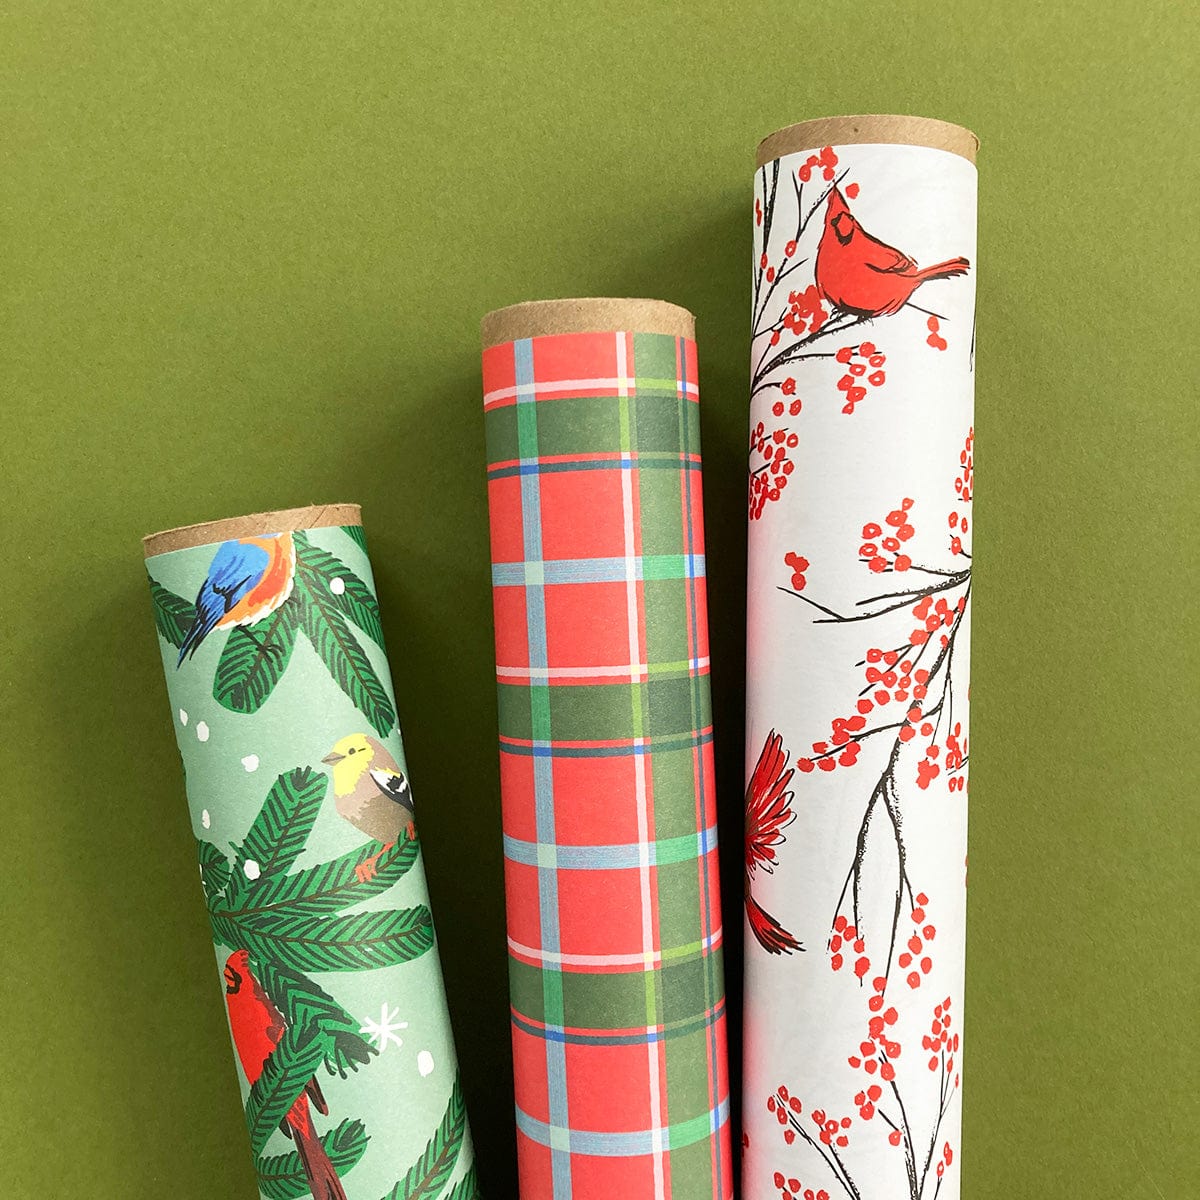 Jumbo Roll Wrapping Paper - Glittered Winter Branches — Bird in Hand